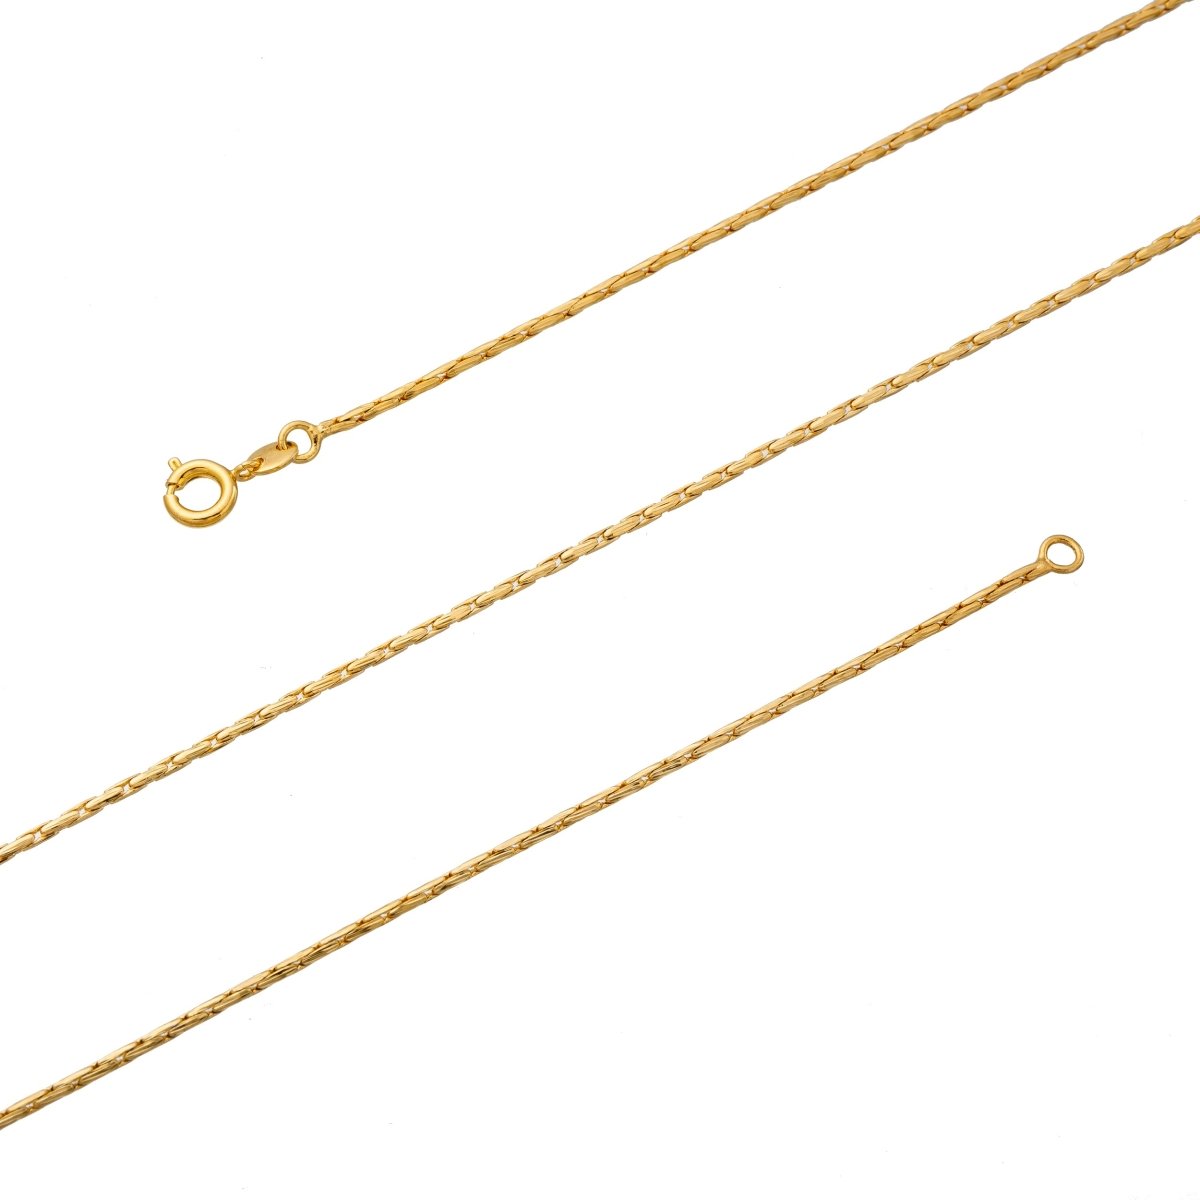 23.5 inch Designed Boston Link Chain Necklace, 24K Gold Plated Designed Finished Necklace Chain For Jewelry Making, Dainty 1.3mm Designed Necklace w/ Spring Ring | CN-168 Clearance Pricing - DLUXCA